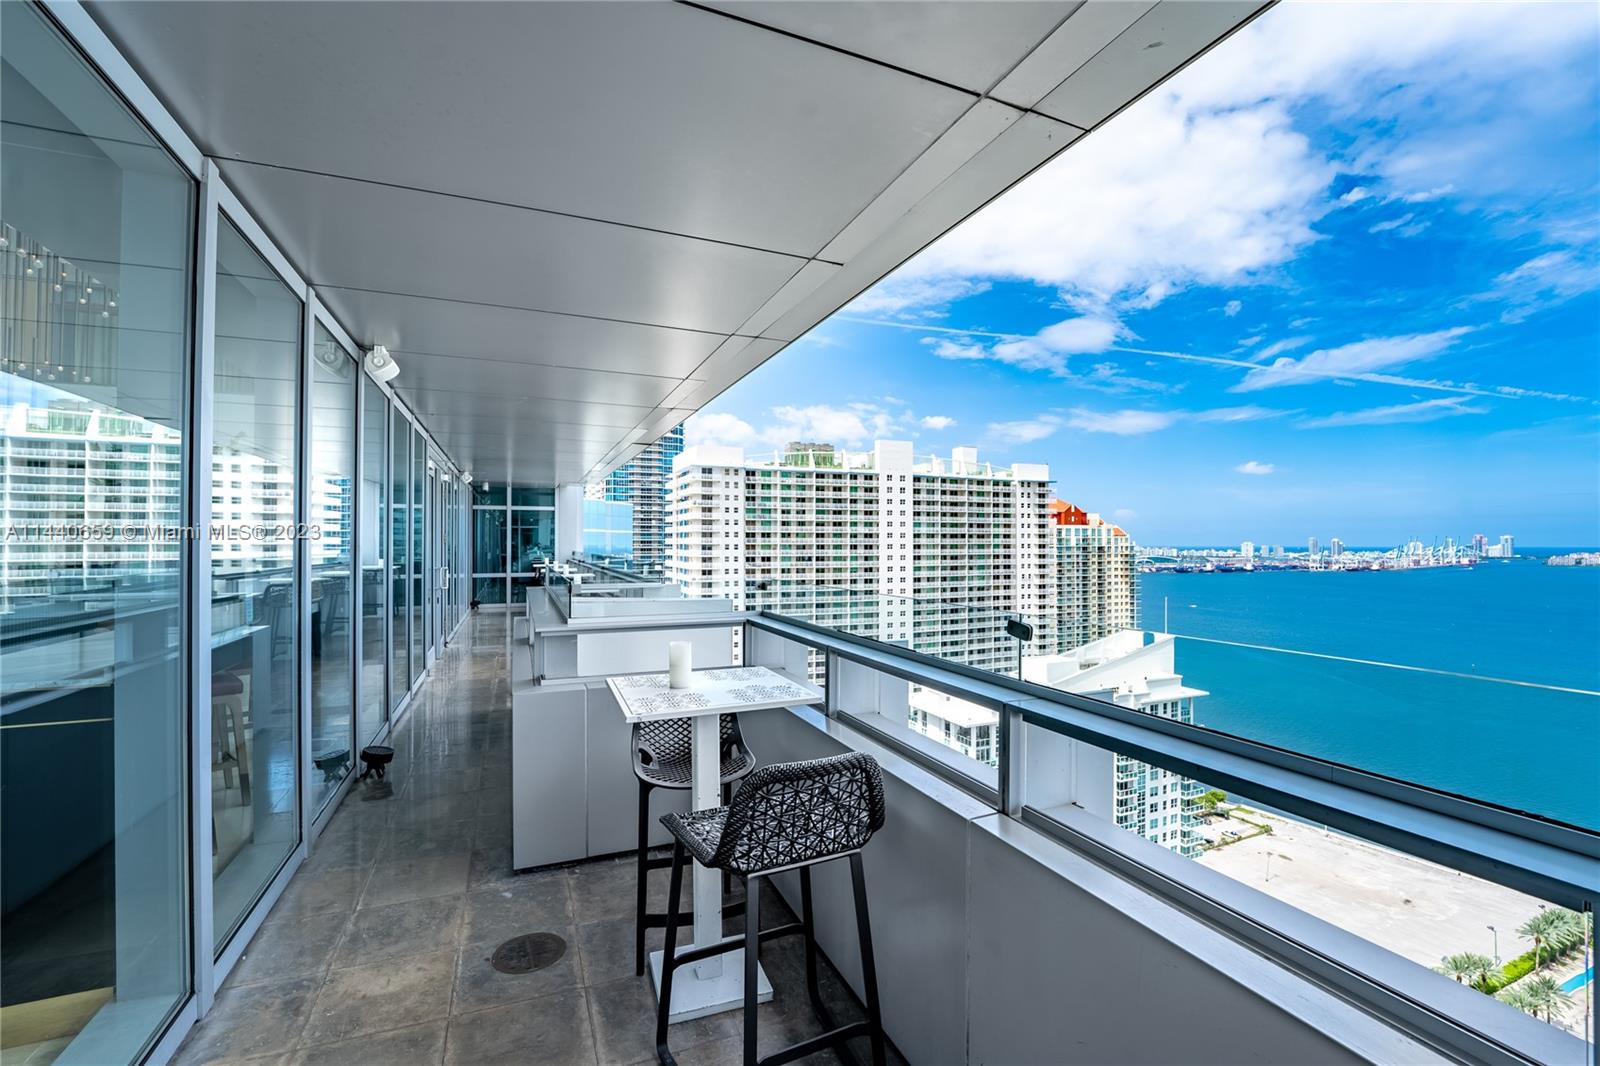 Amazing 1/1 fully furnished and equipped apartment located in the heart of Miami, Brickell financial district. 5-stars services and amenities of the AKA Brickell Hotel. The hotel-condo has an incredible view of the skyline in Brickell Not in the hotel program. Airbnb approved